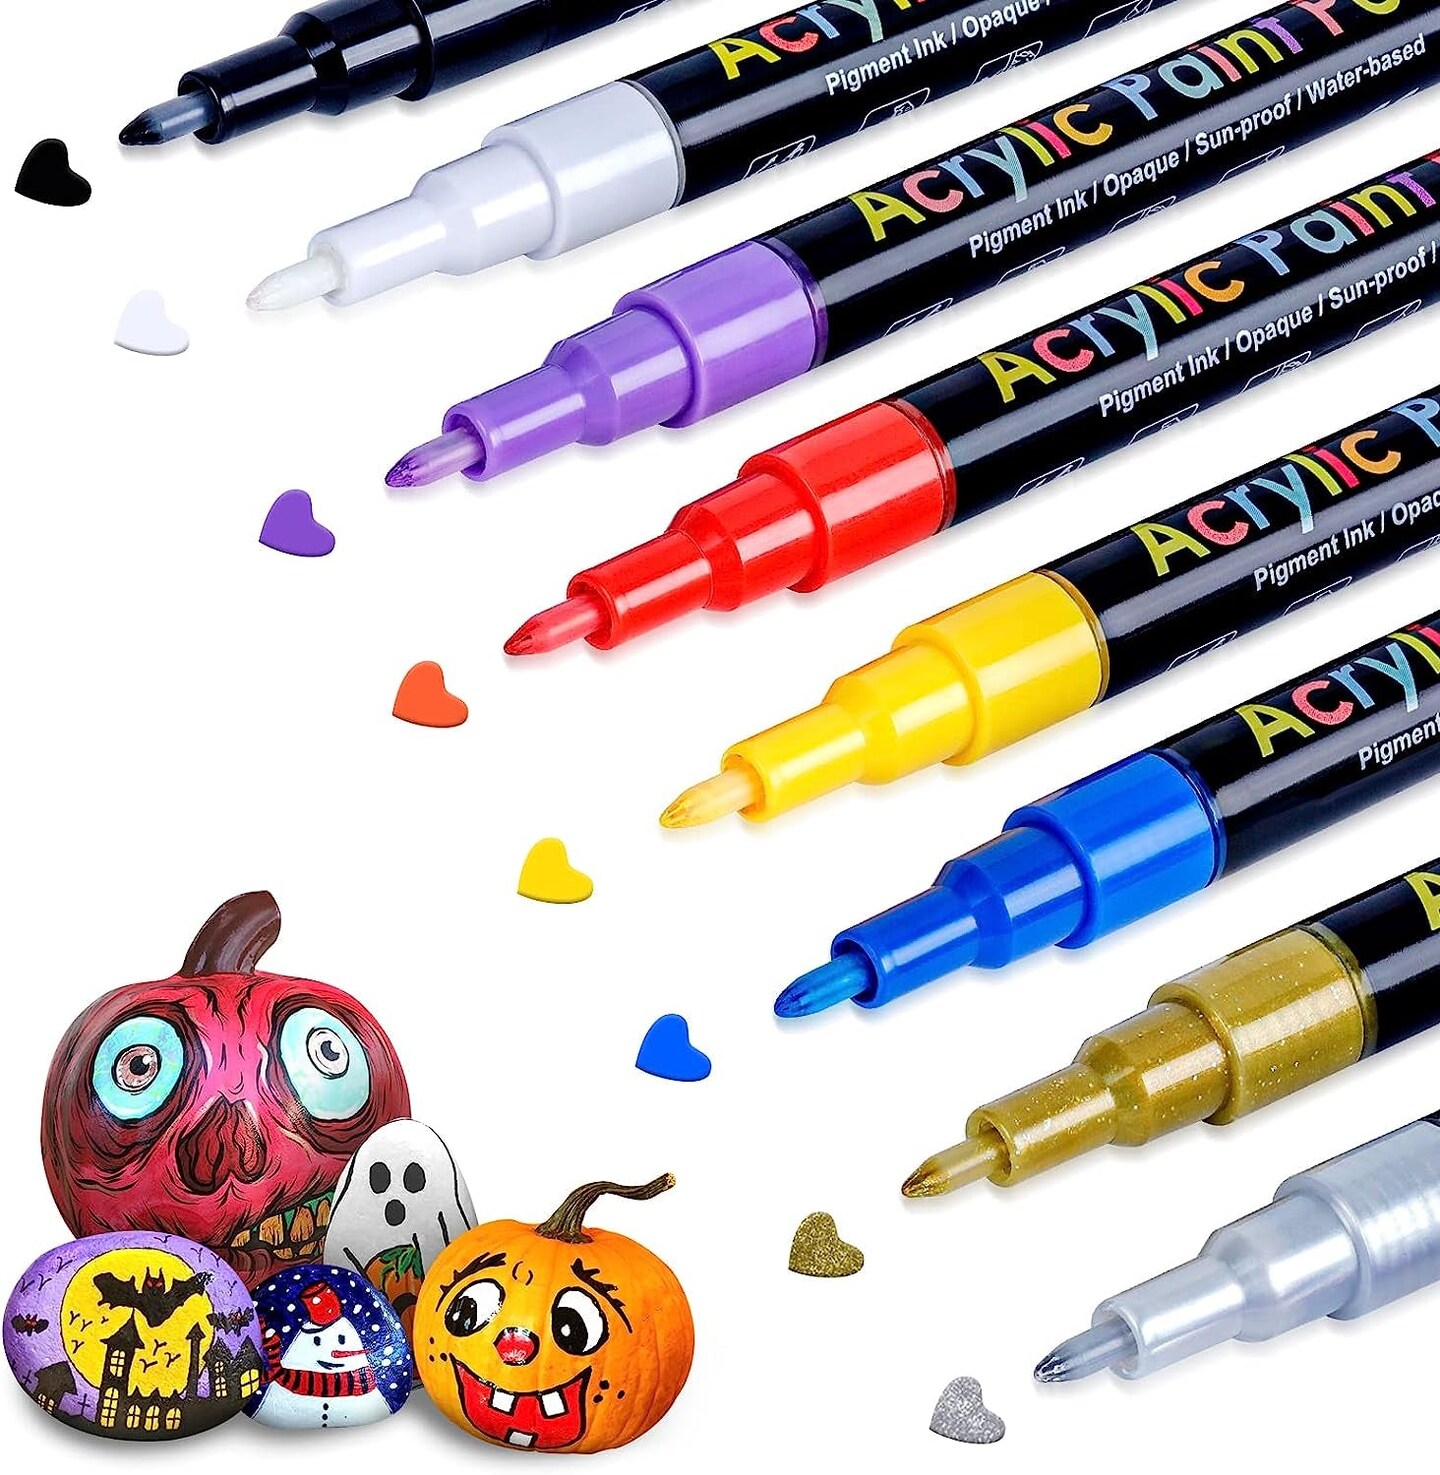 Acrylic Paint Pens Paint Markers, Fine Point Paint Pens for Rock Painting  Glass Wood Ceramic Fabric Metal Canvas, Drawing Art